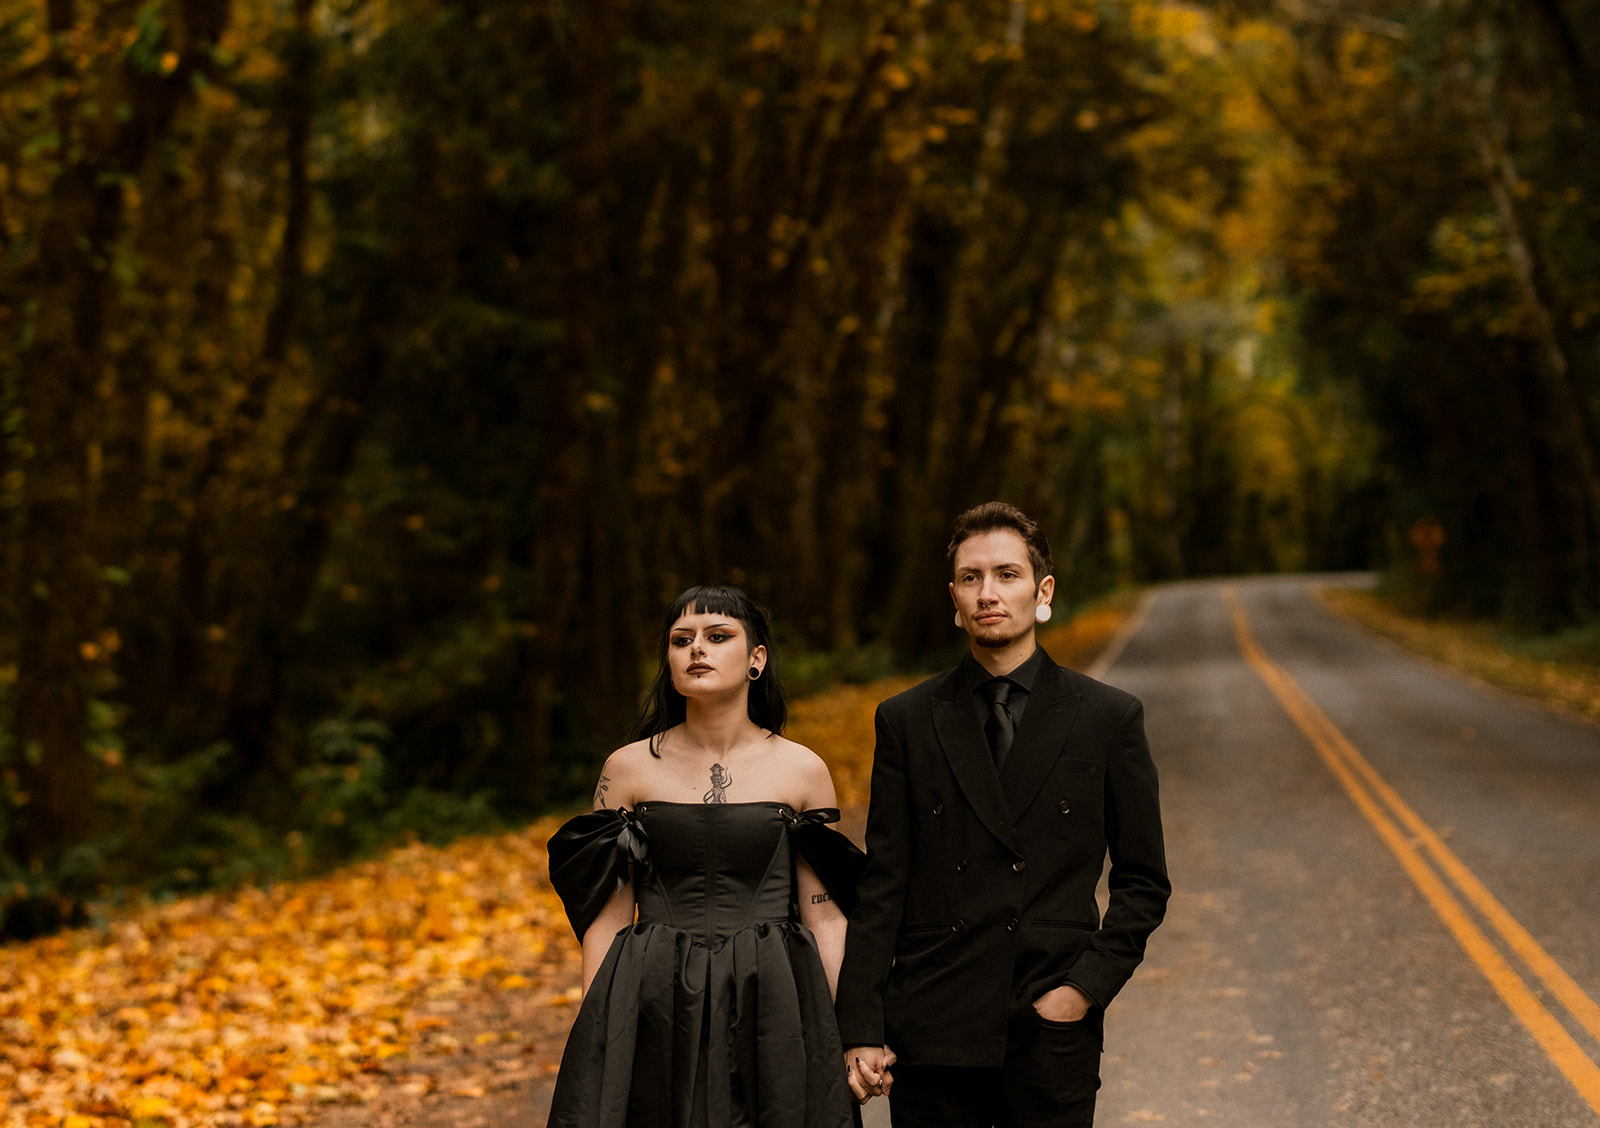 Two people in black wedding outfits walk hand in hand on a blacktop road, with fall leaves falling to the ground.